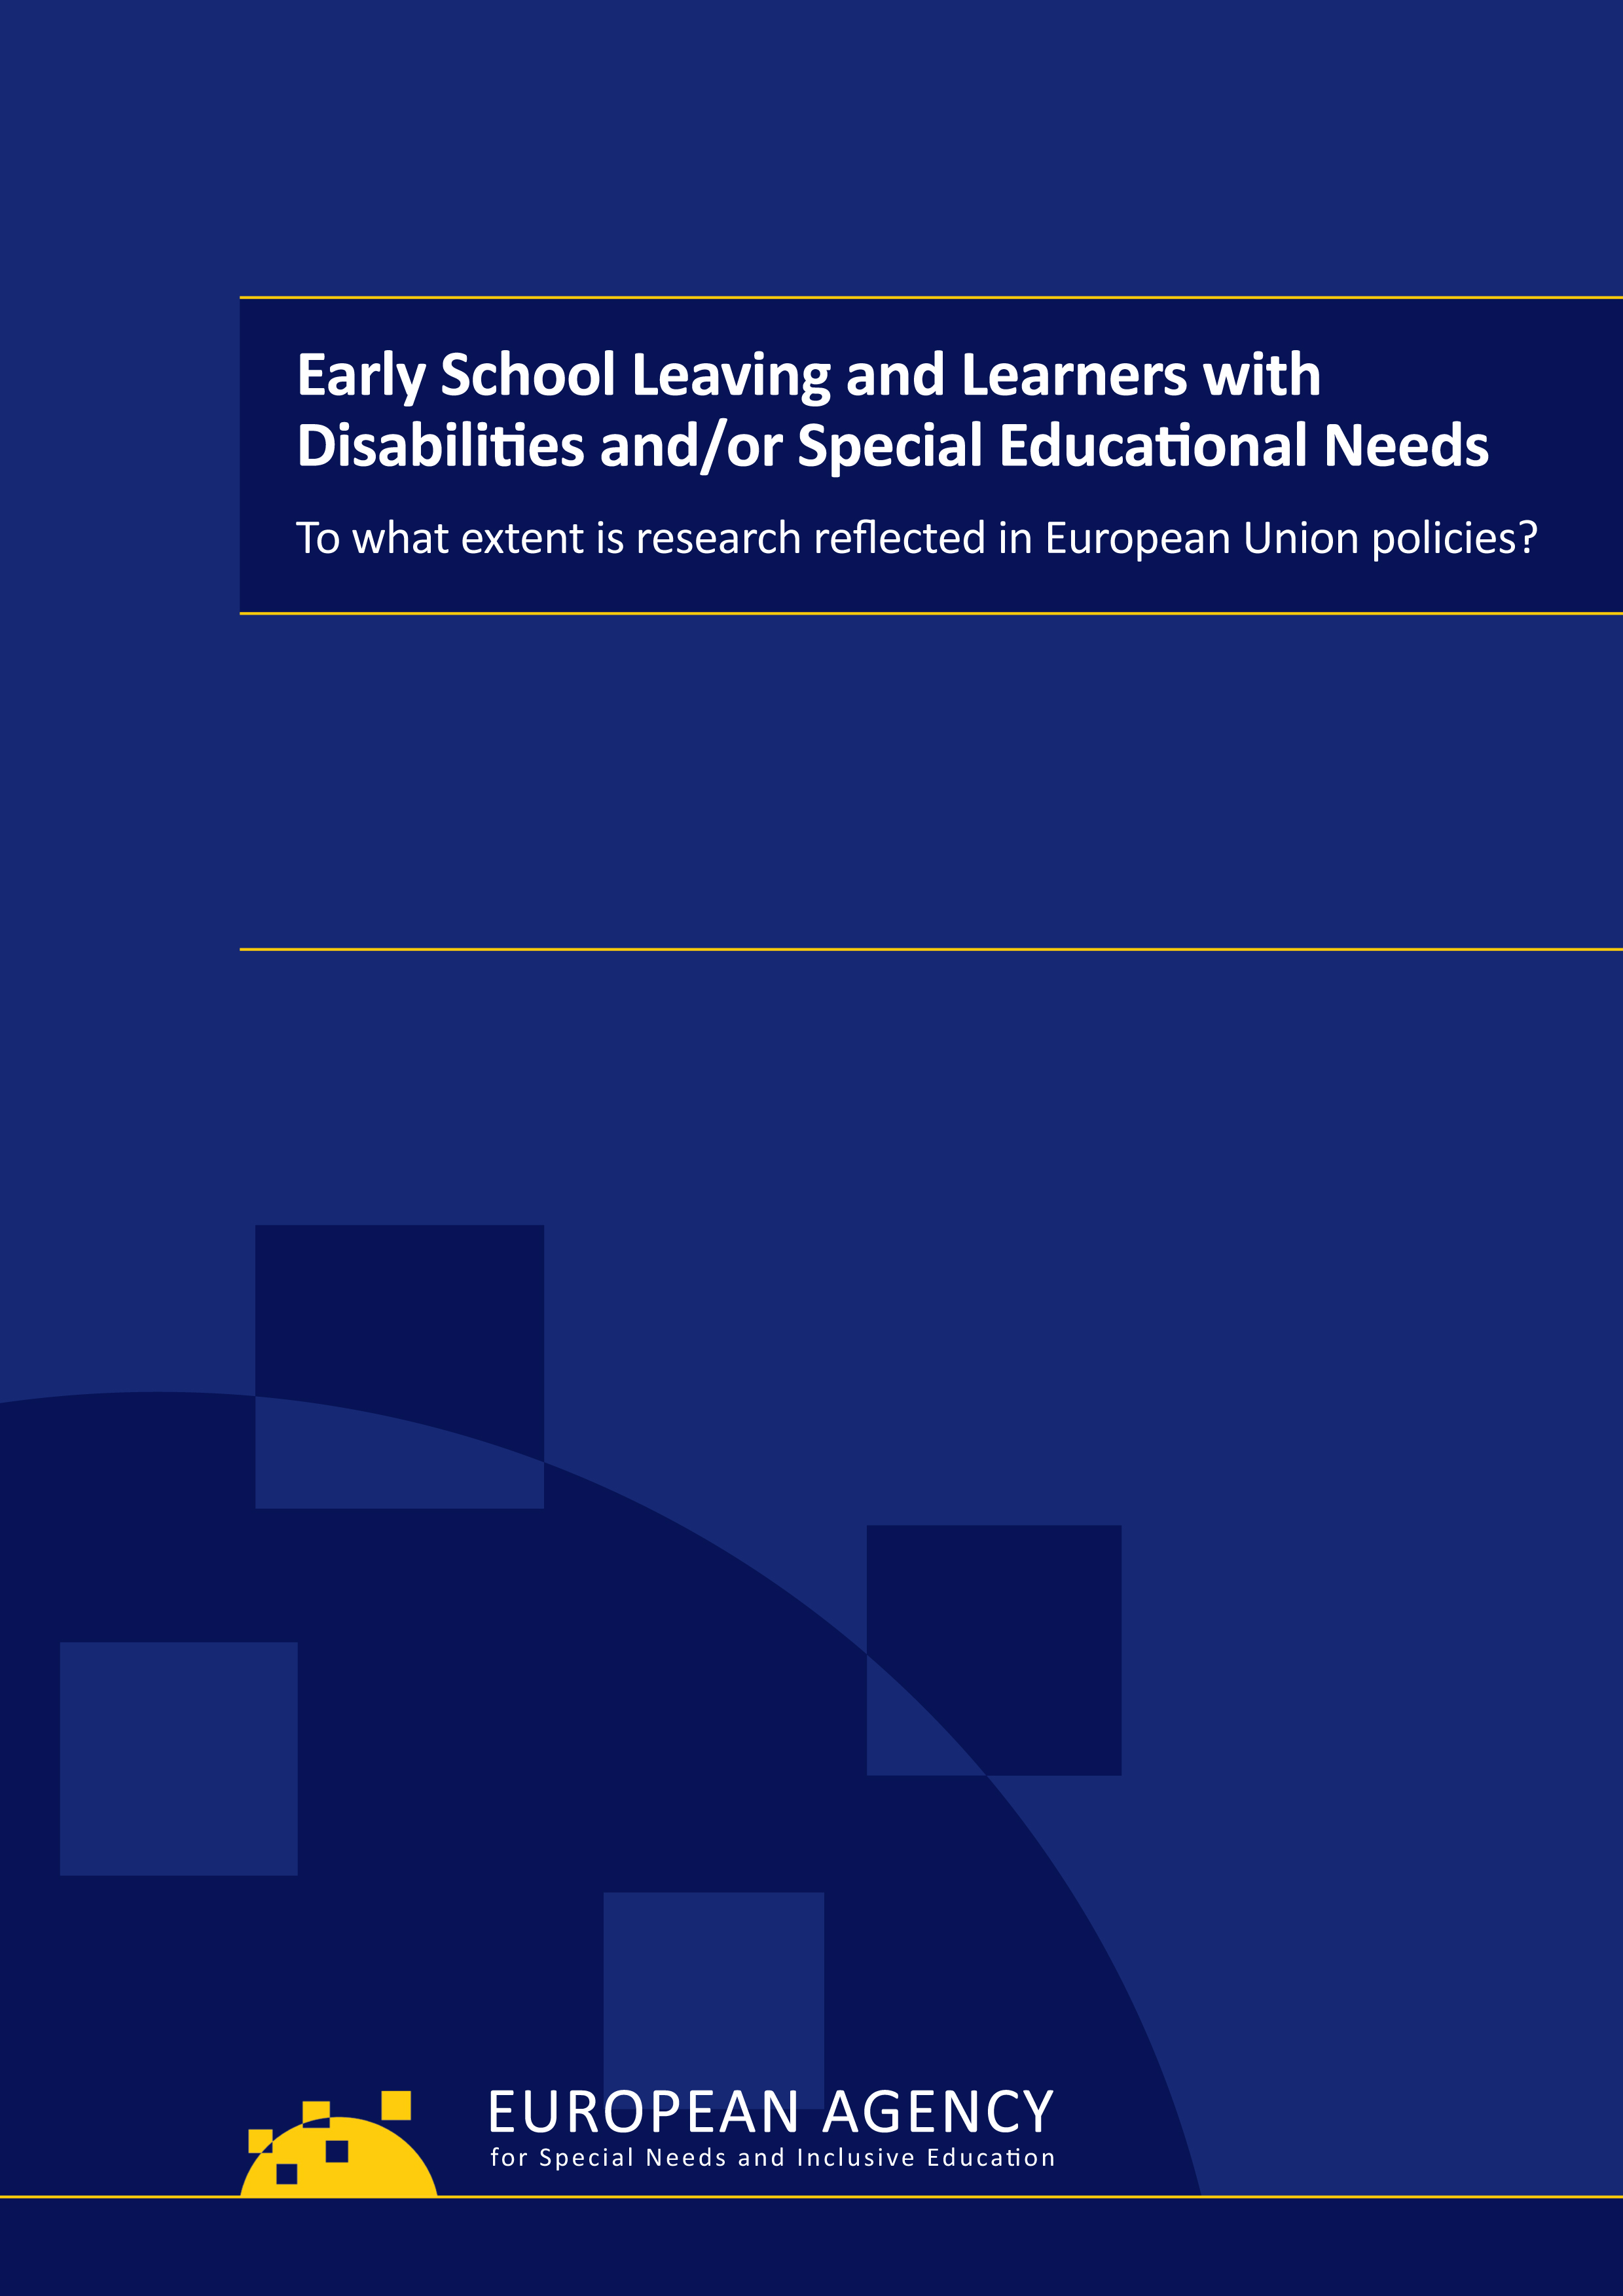 Early School Leaving and Learners with Disabilities and/or Special Educational Needs: To what extent is research reflected in European Union policies?